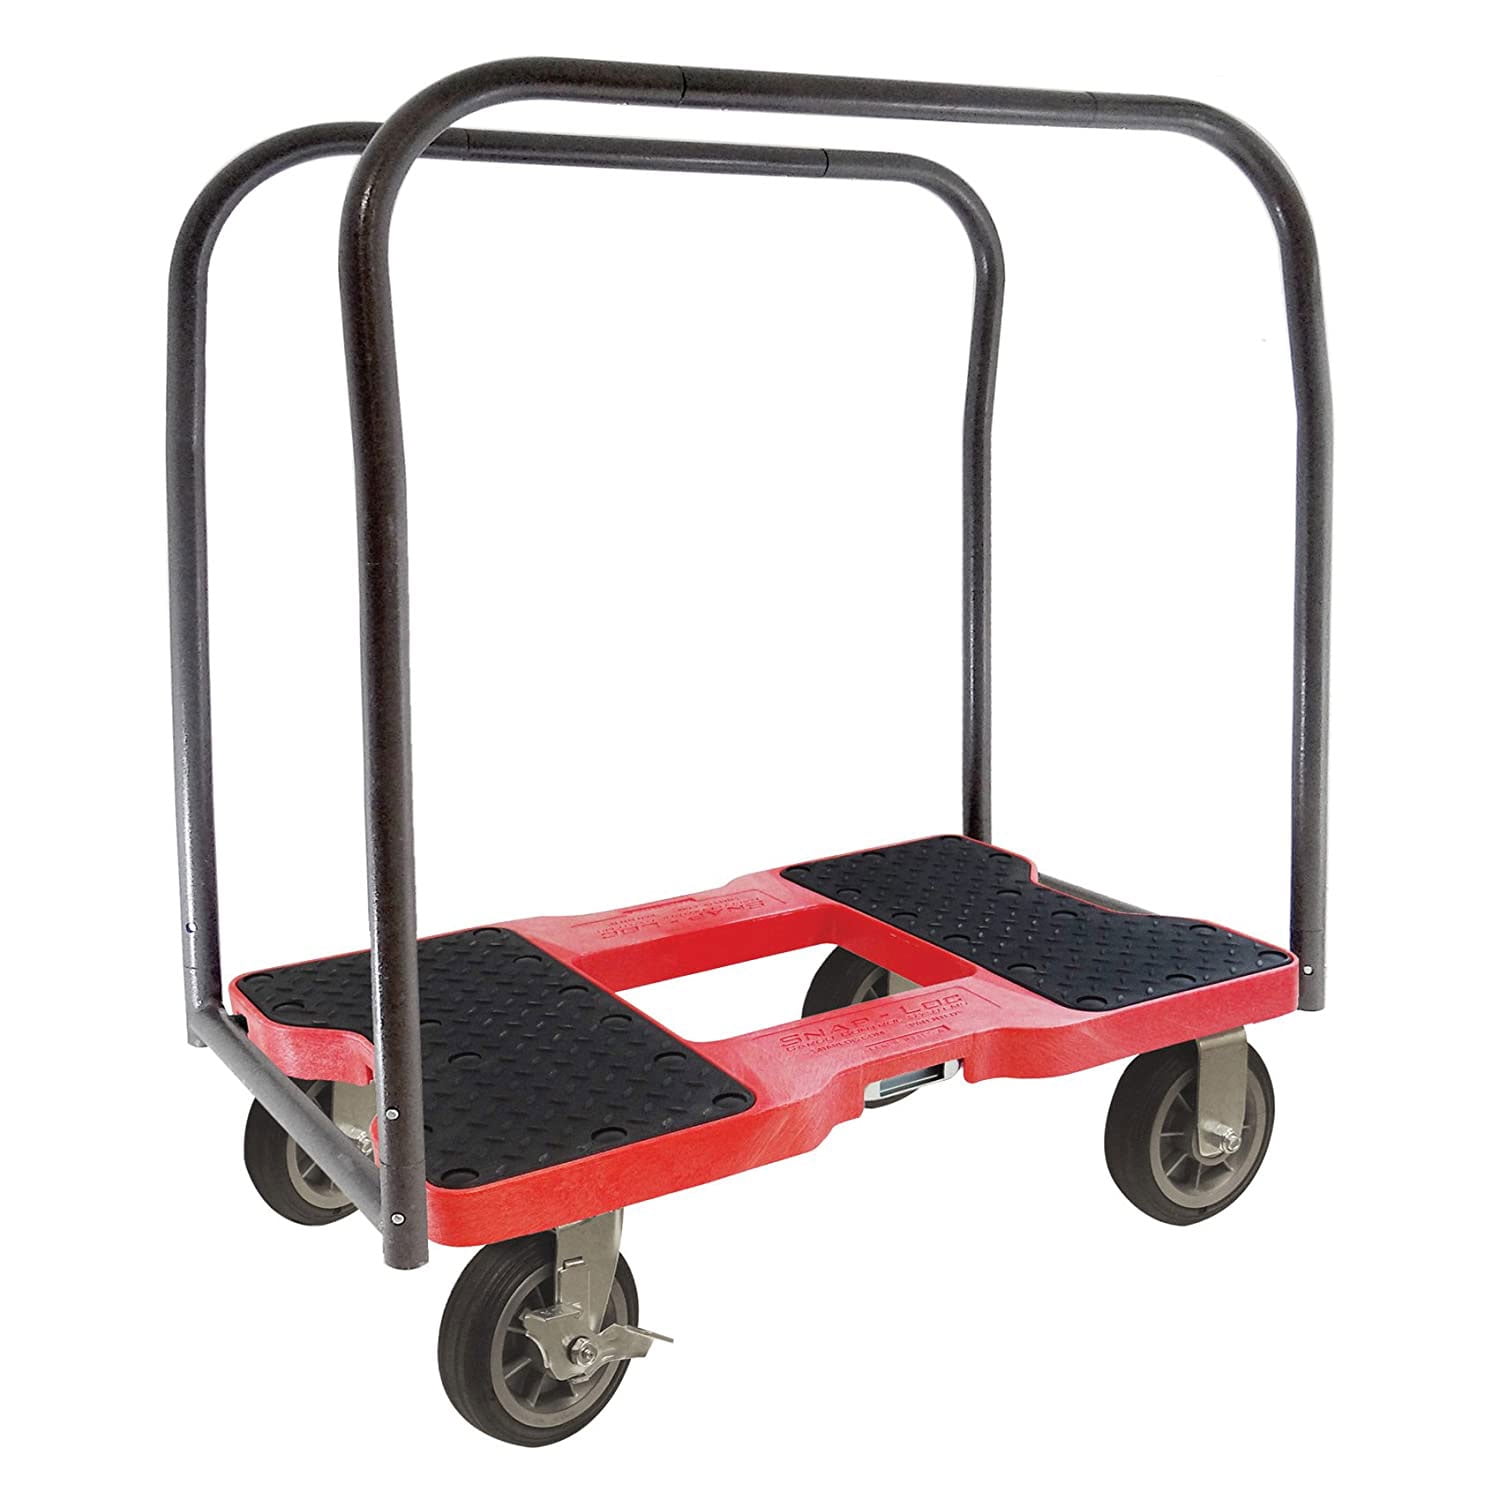 Removeable Push Bar And Optional E-Strap Safety Attachment Snap-Loc 1800 Lb Super-Duty Professional E-Track Push Cart Dolly Black SL1800P6B Safely Moves More In Less Time With Easy Rolling Casters 